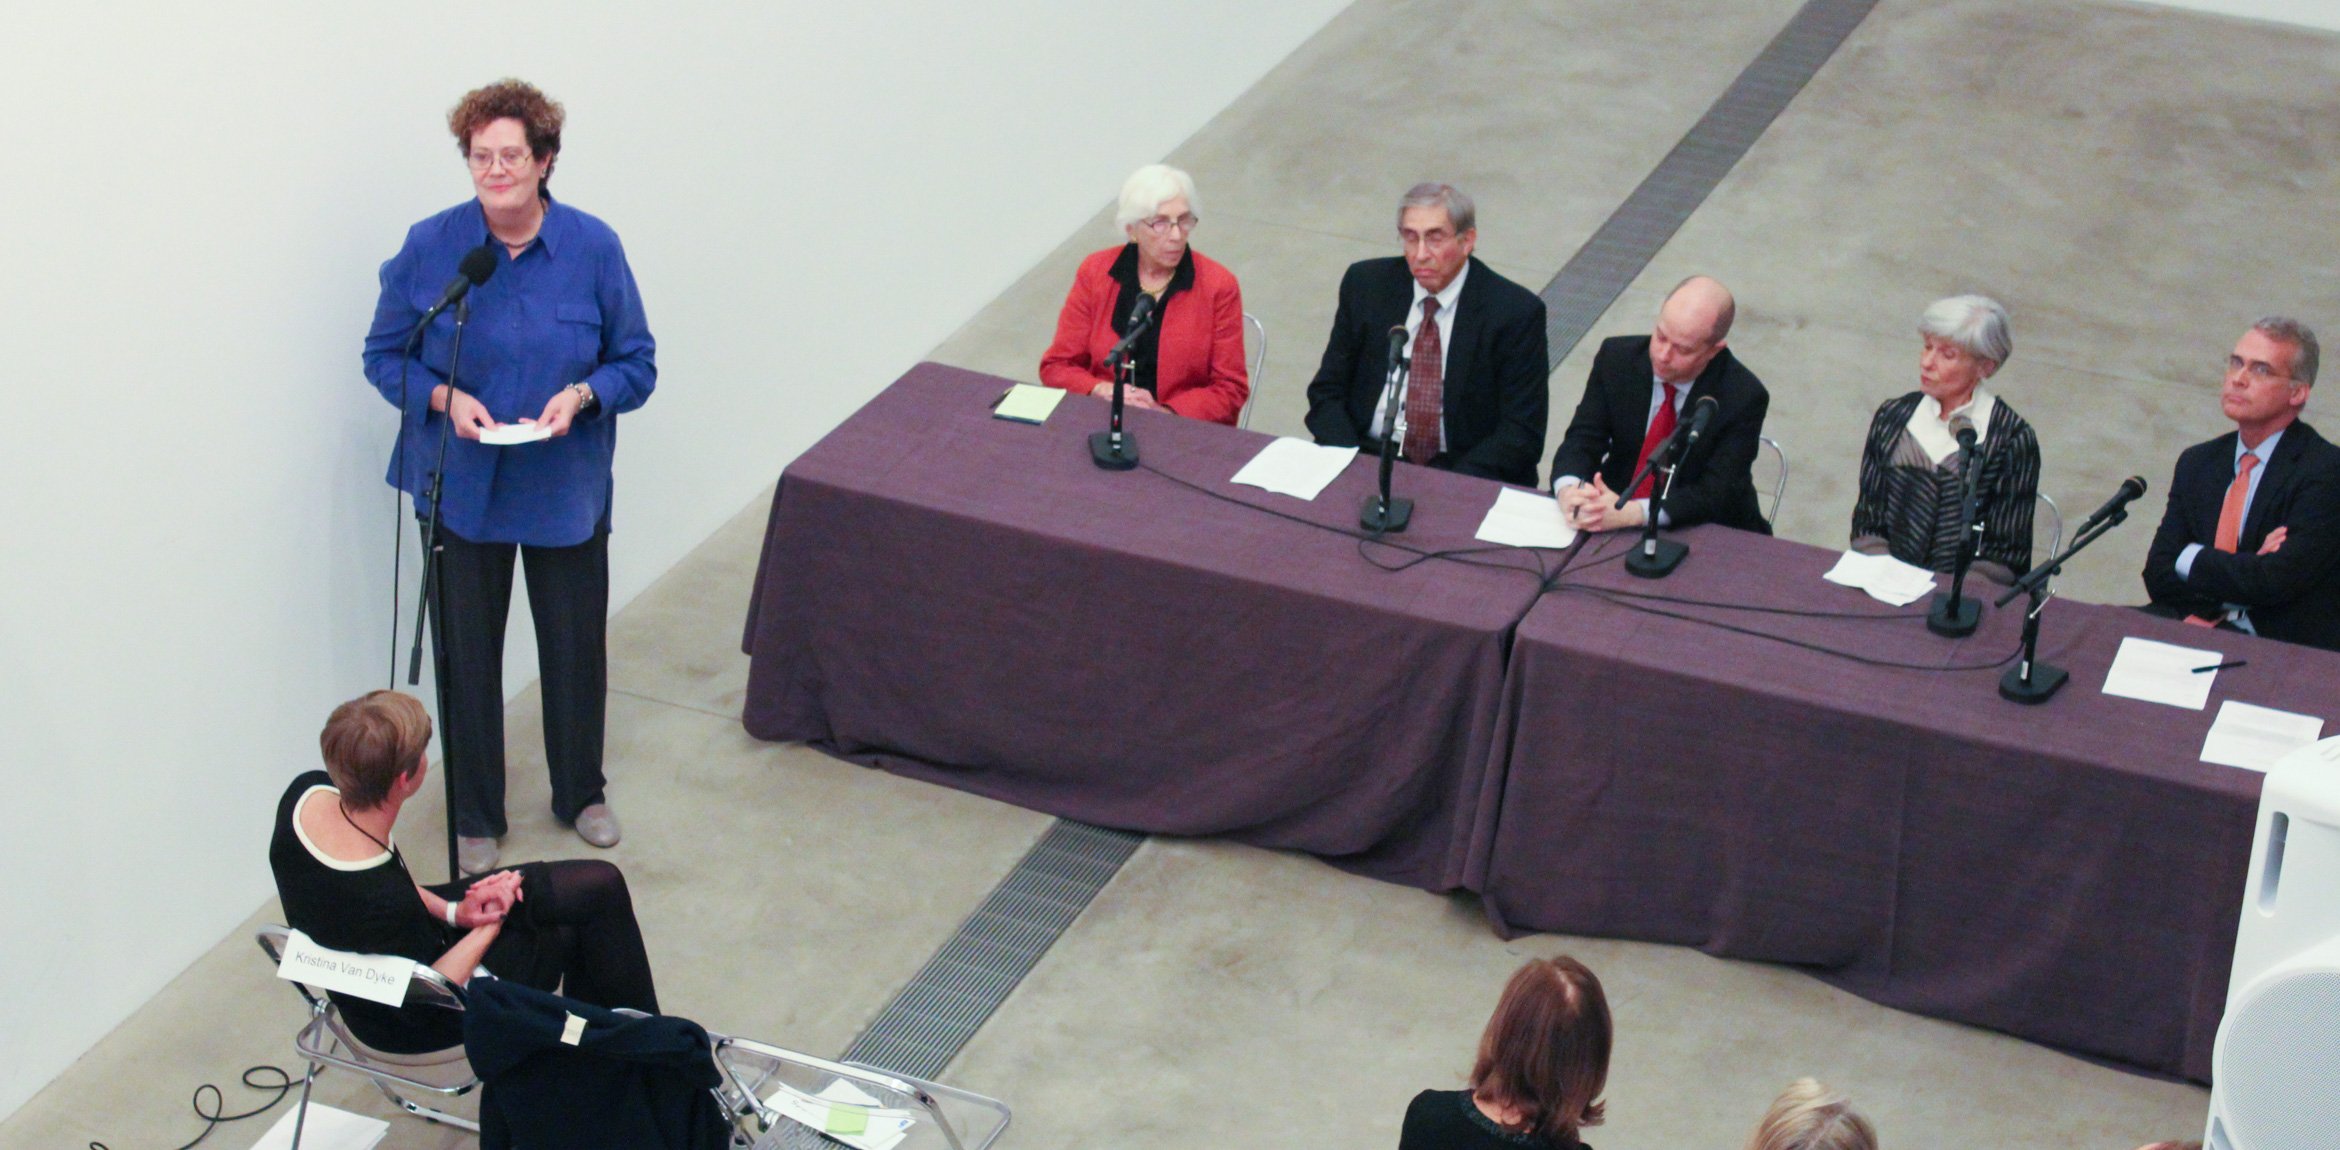 Elizabeth Childs stands at a microphone in the Lower-Main Gallery to the left of a panel table of collectors and looks at the audience.